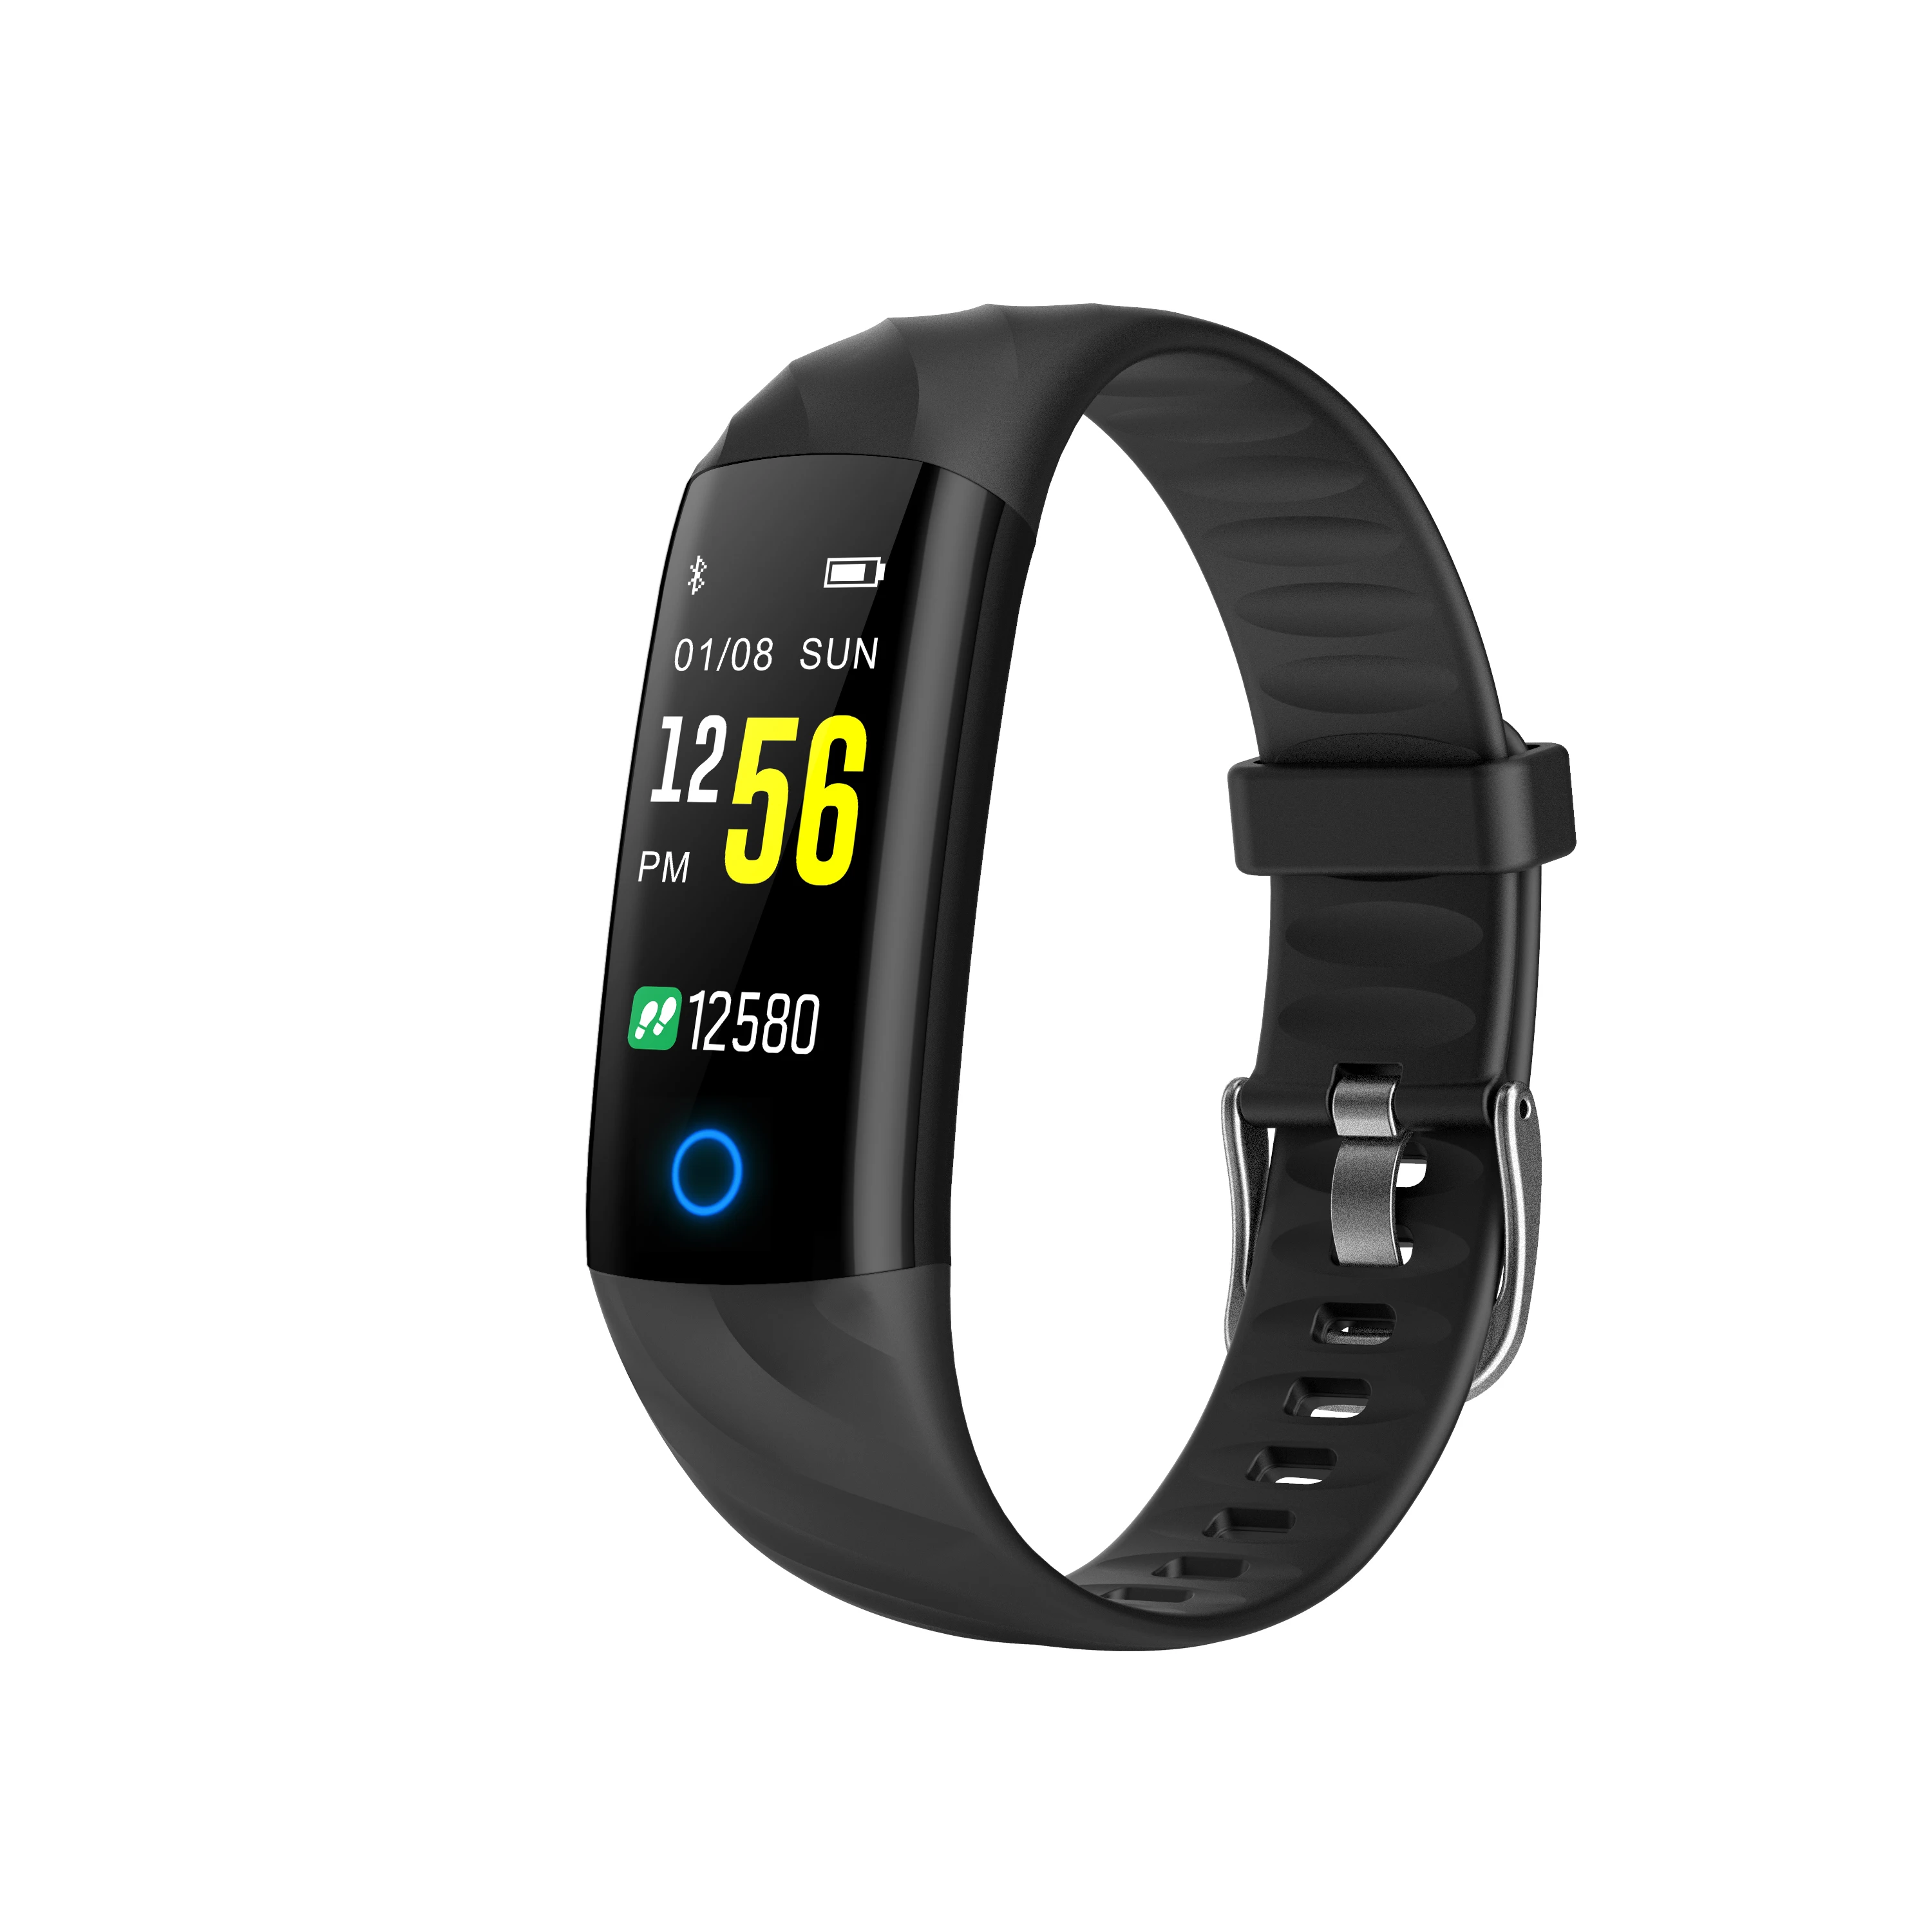 2019 Amazon hot sale S5 color screen smart band activity tracker